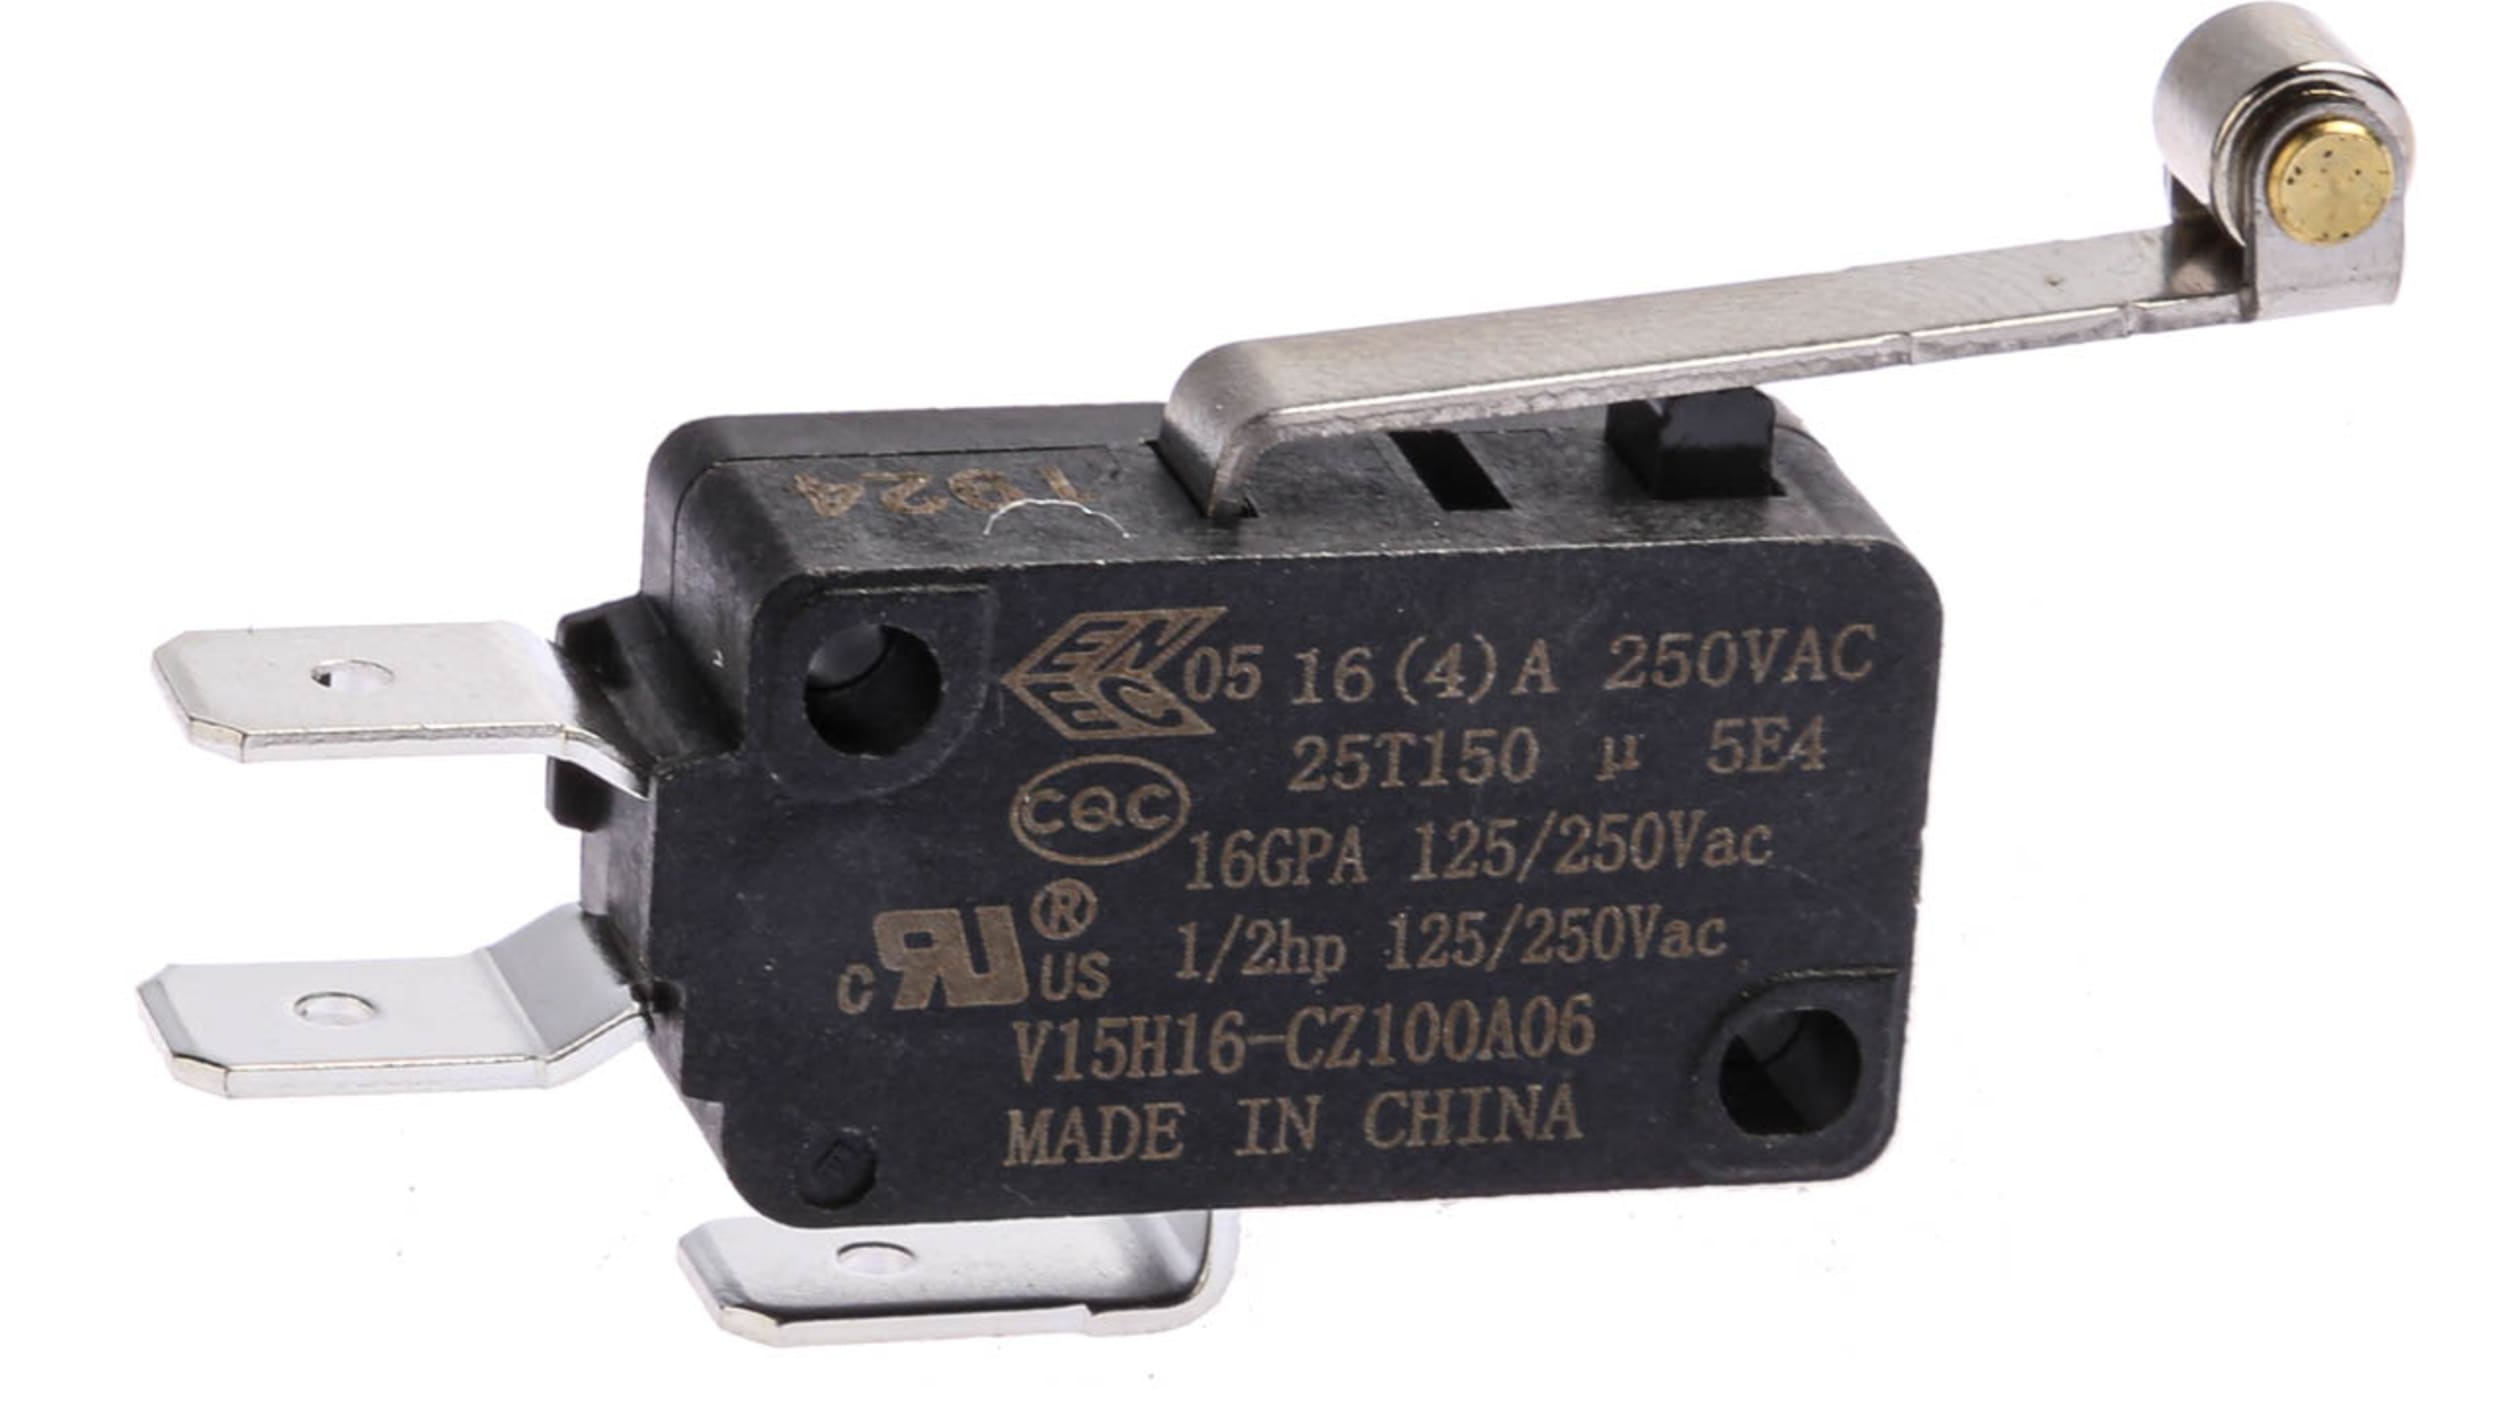 SPST Micro Switch Small Size with Lever and IP67 Waterproof Certificate